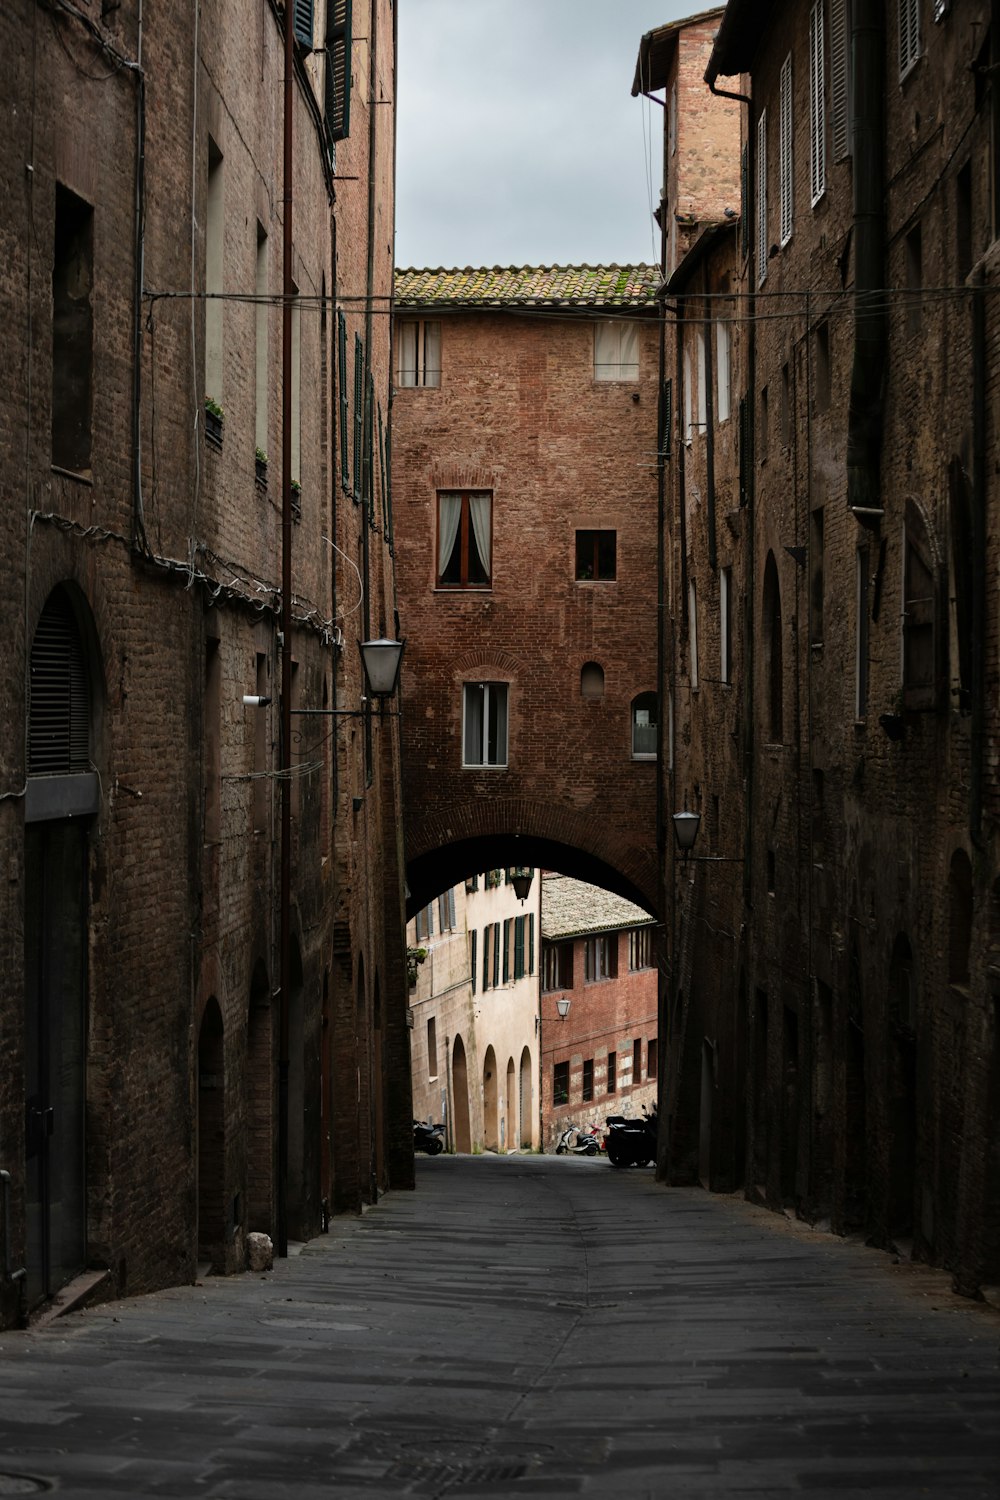 a narrow alley way with a brick building in the background